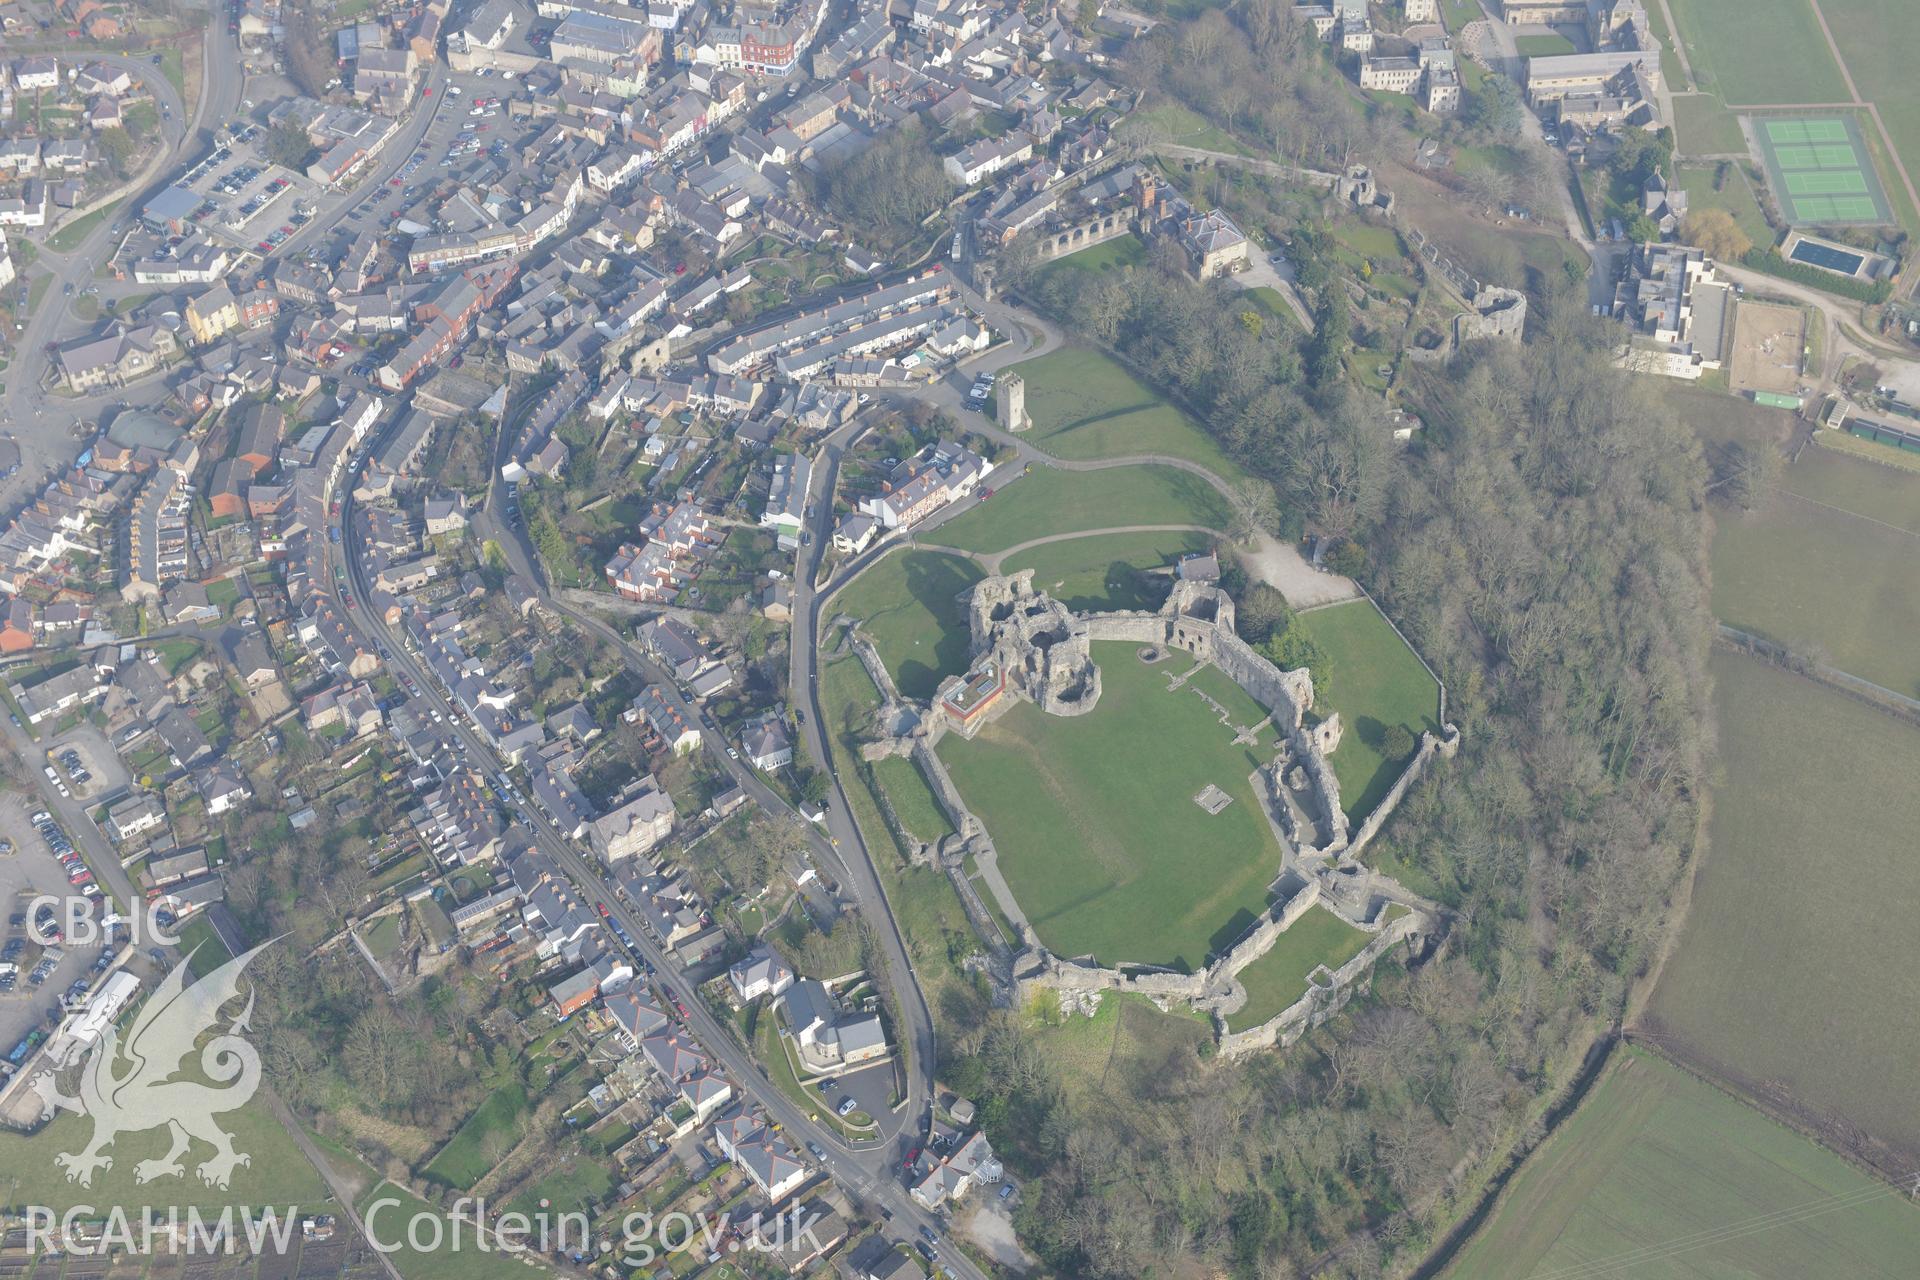 Denbigh Castle and visitor's centre, St. Hilary's chapel, Denbigh town wall, and Castle House, Denbigh. Oblique aerial photograph taken during the Royal Commission?s programme of archaeological aerial reconnaissance by Toby Driver on 28th February 2013.